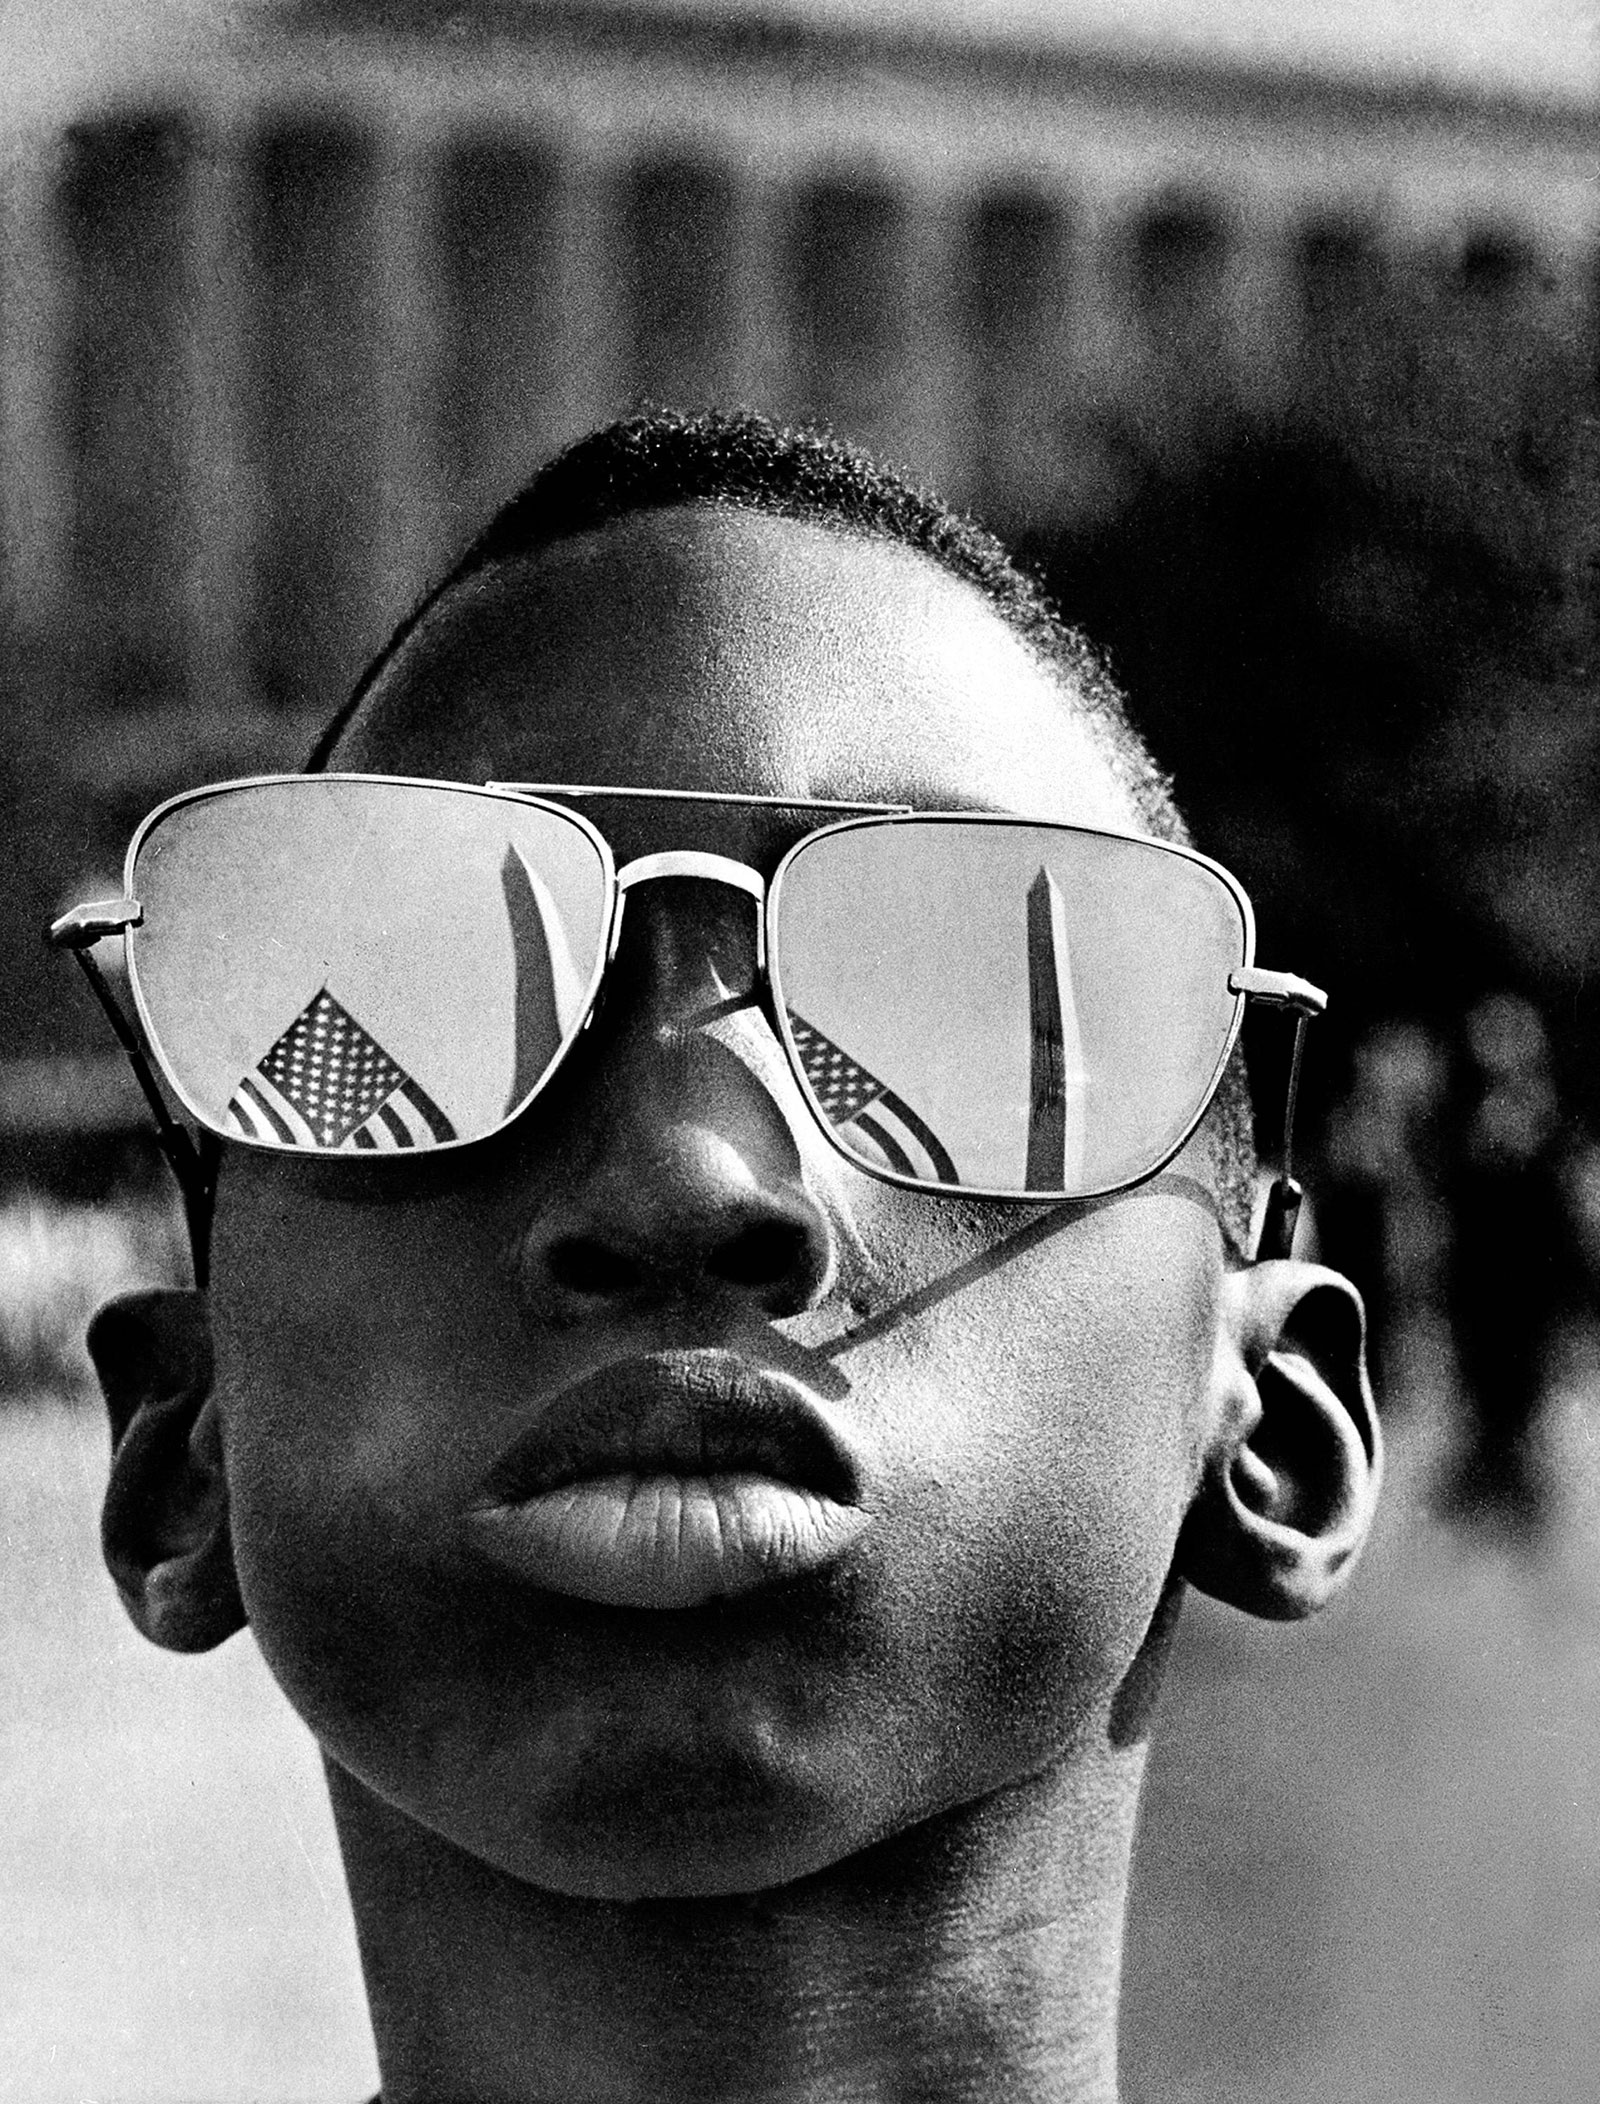 Kid attending Martin Luther King Jr's "I have a dream" speech, 28th Aug 1963.